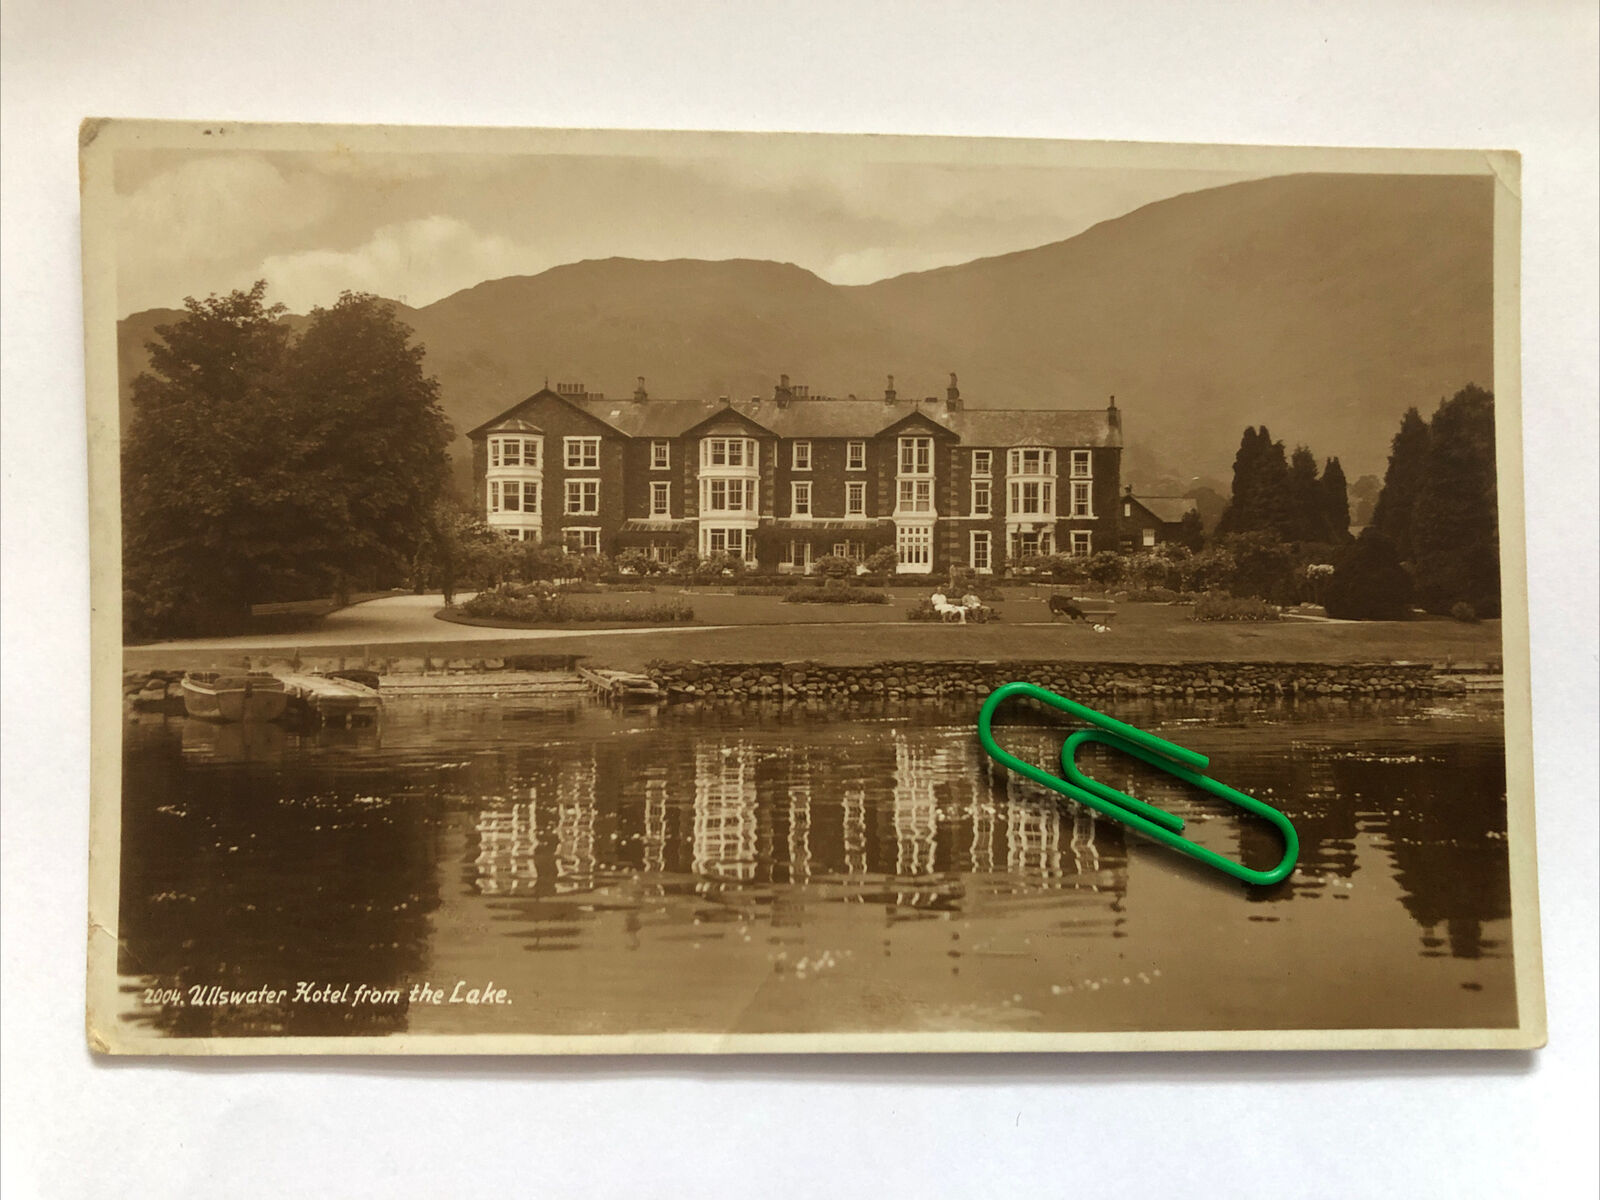 House Clearance - Ullswater Hotel From The Lake English Lake District Cumbria RPPC